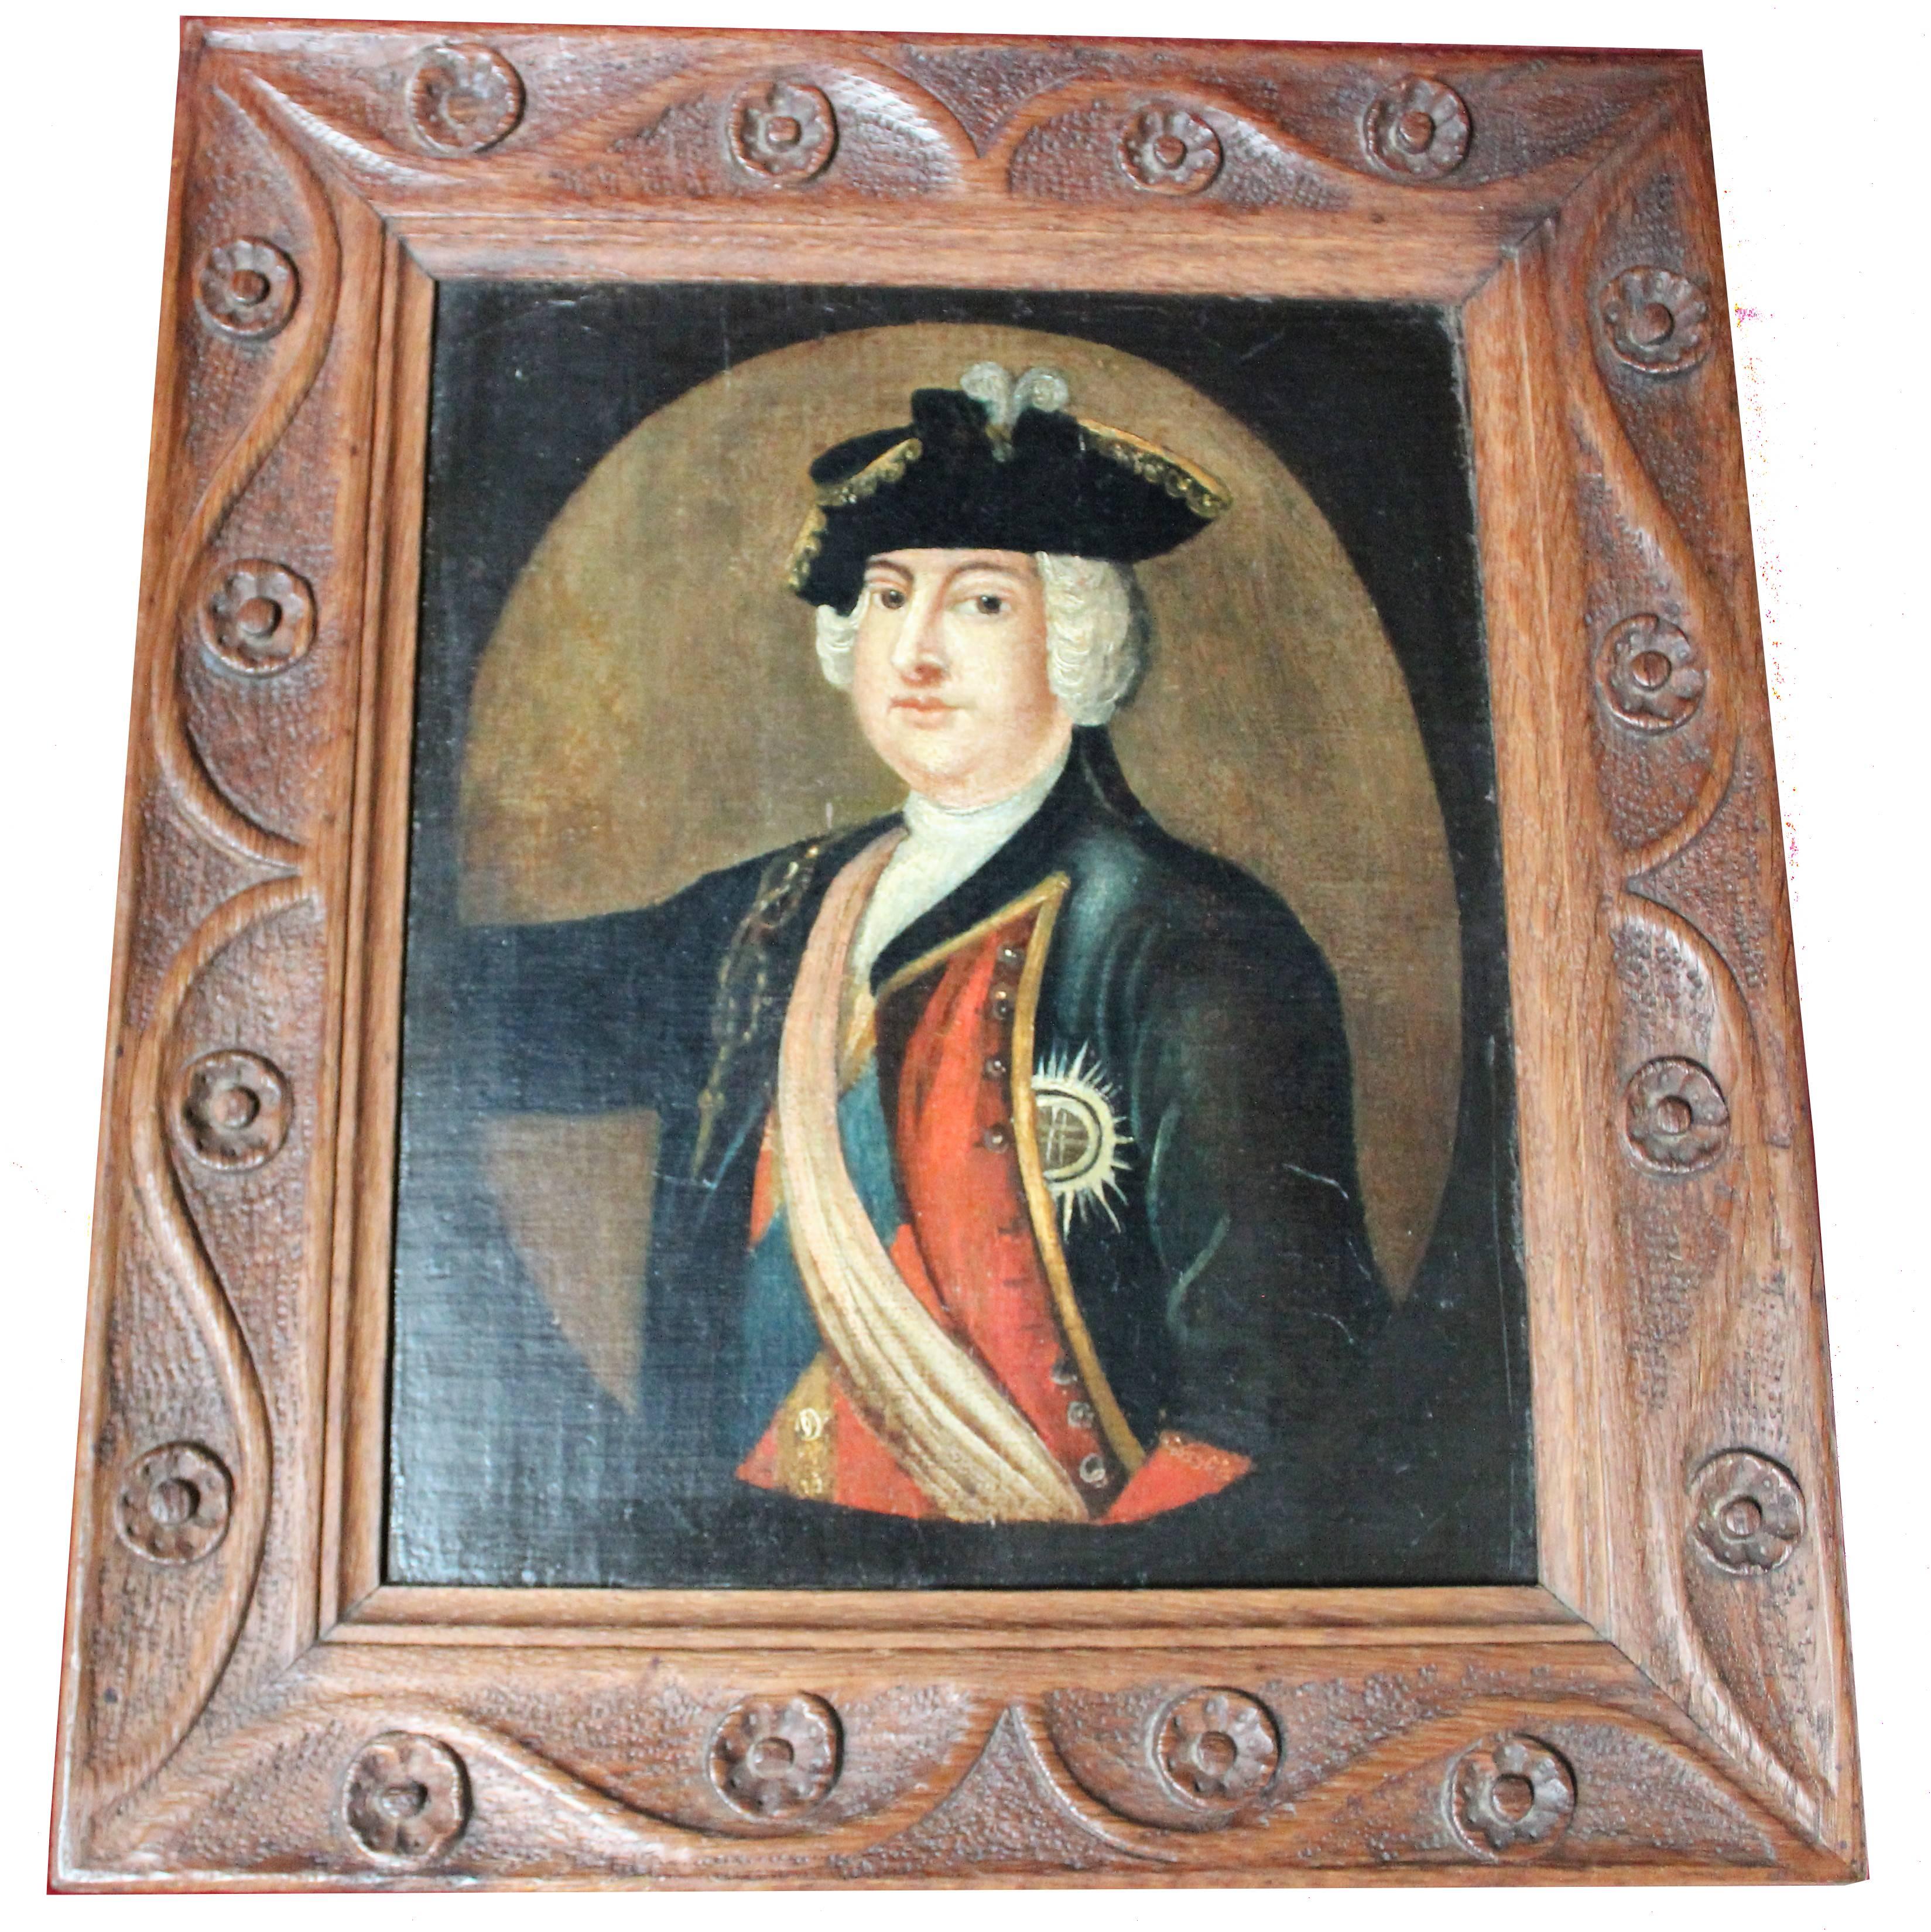 Rare Primitive oil on board portrait of Prince William, Duke of Cumberland, Prince William Augustus (1721-1765) was the third and youngest child of King George II of Great Britain and Caroline of Ansbach. 
He gained his title in 1726 and is best